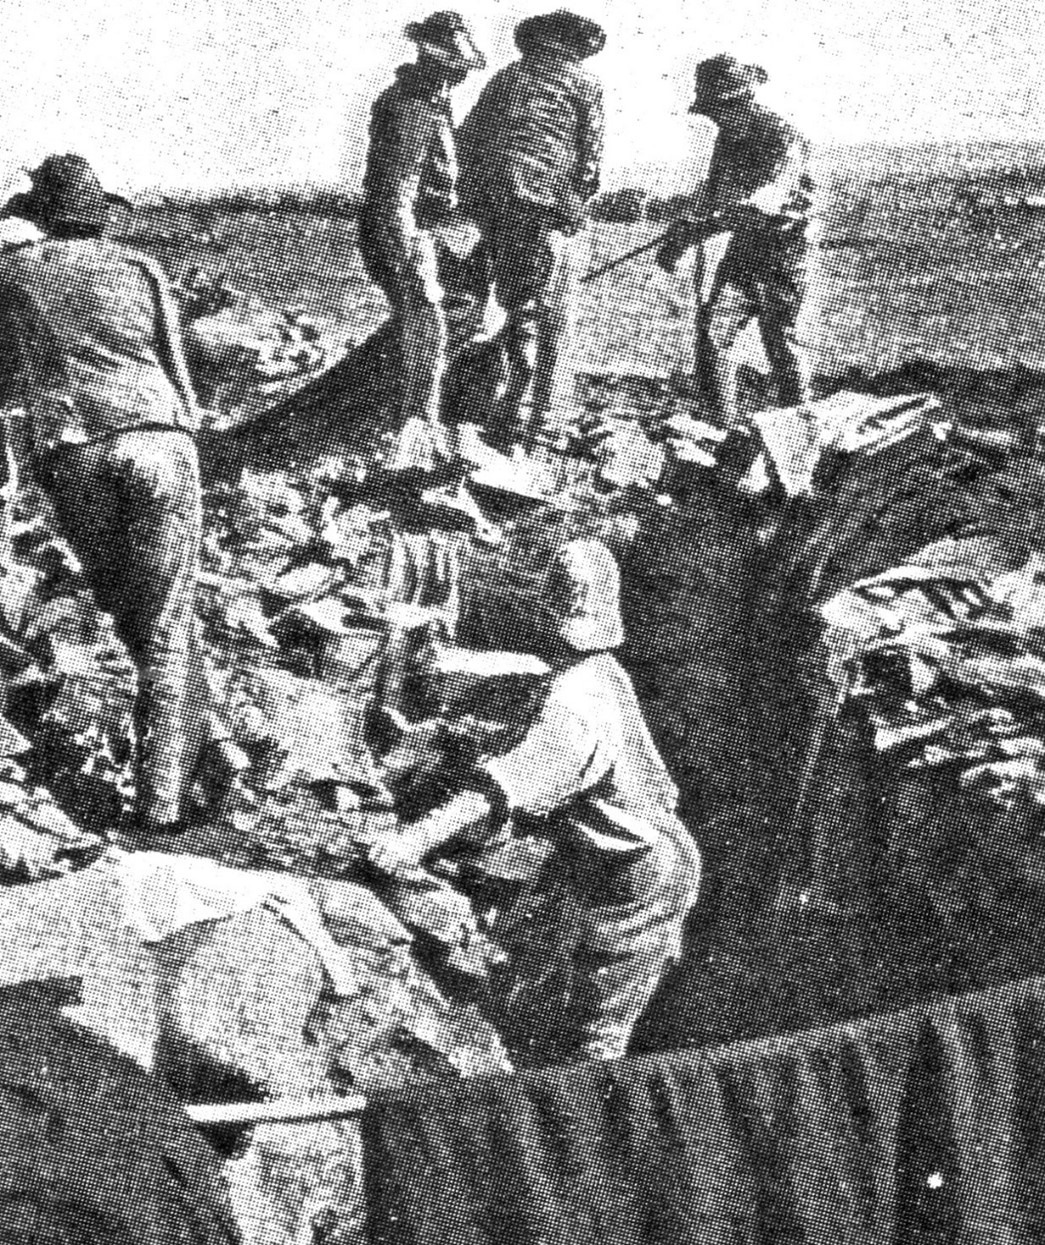 Filling in defence trenches after the end of the Elands River siege